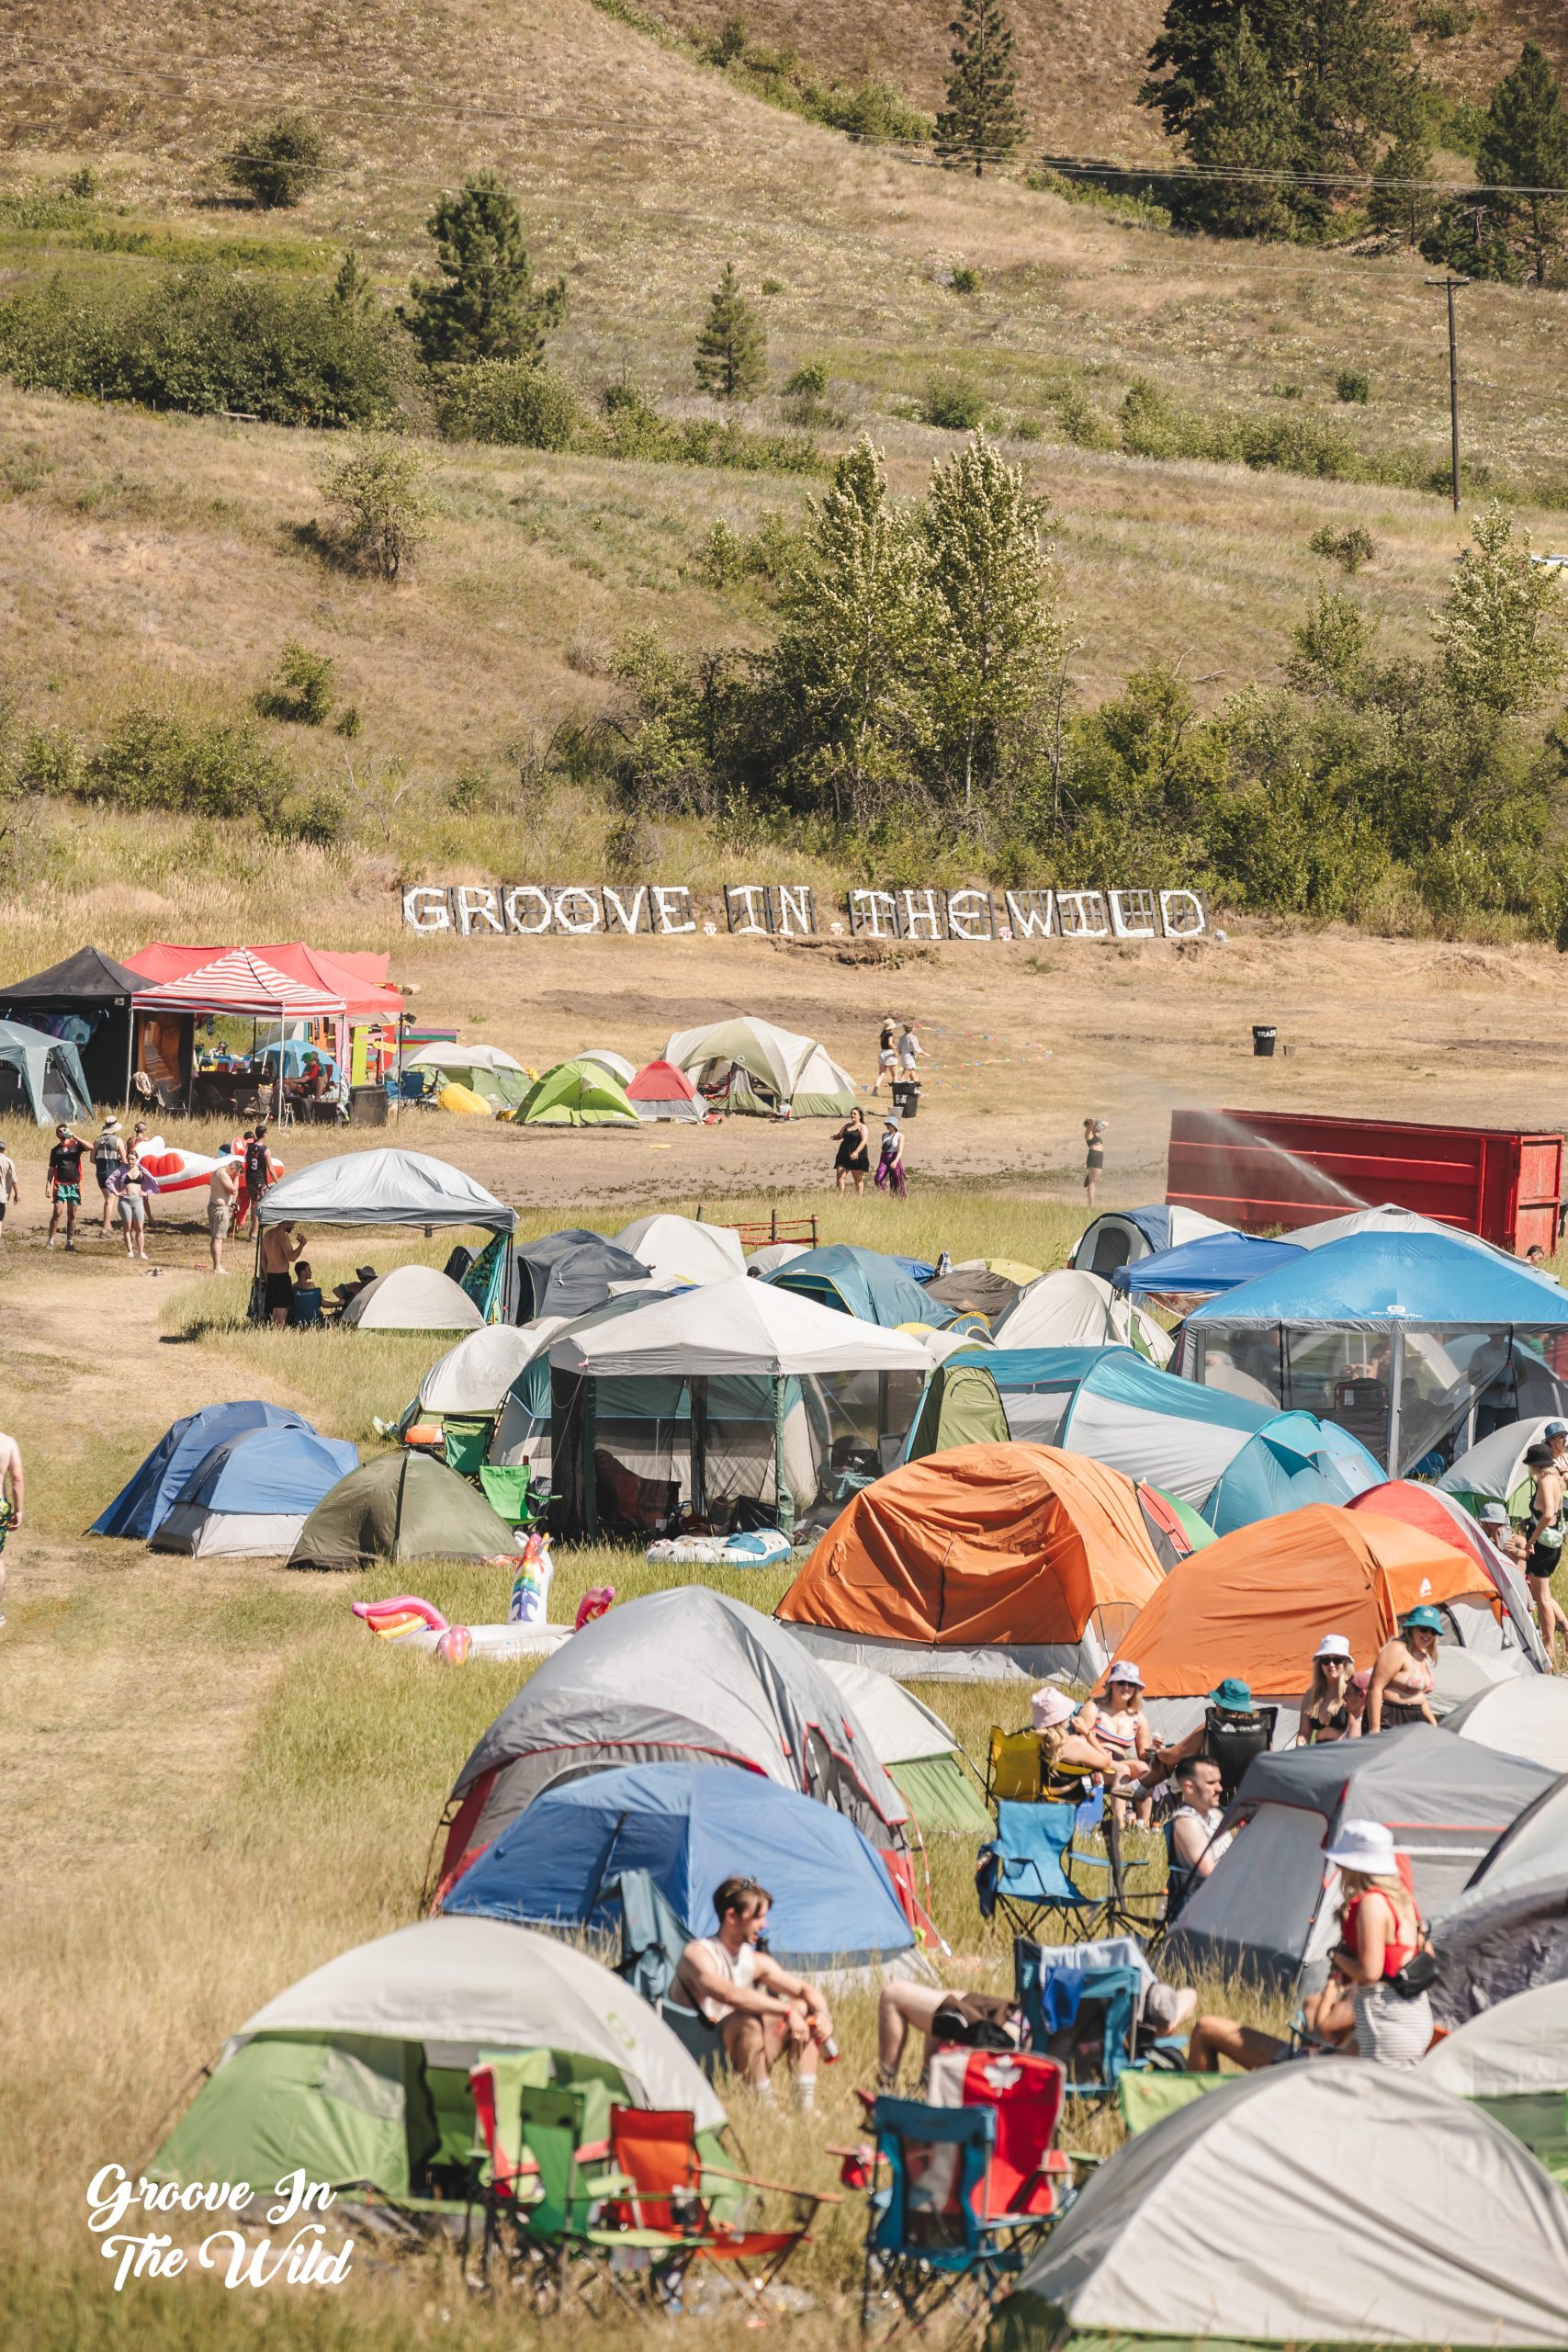 Groove in the wild music festival